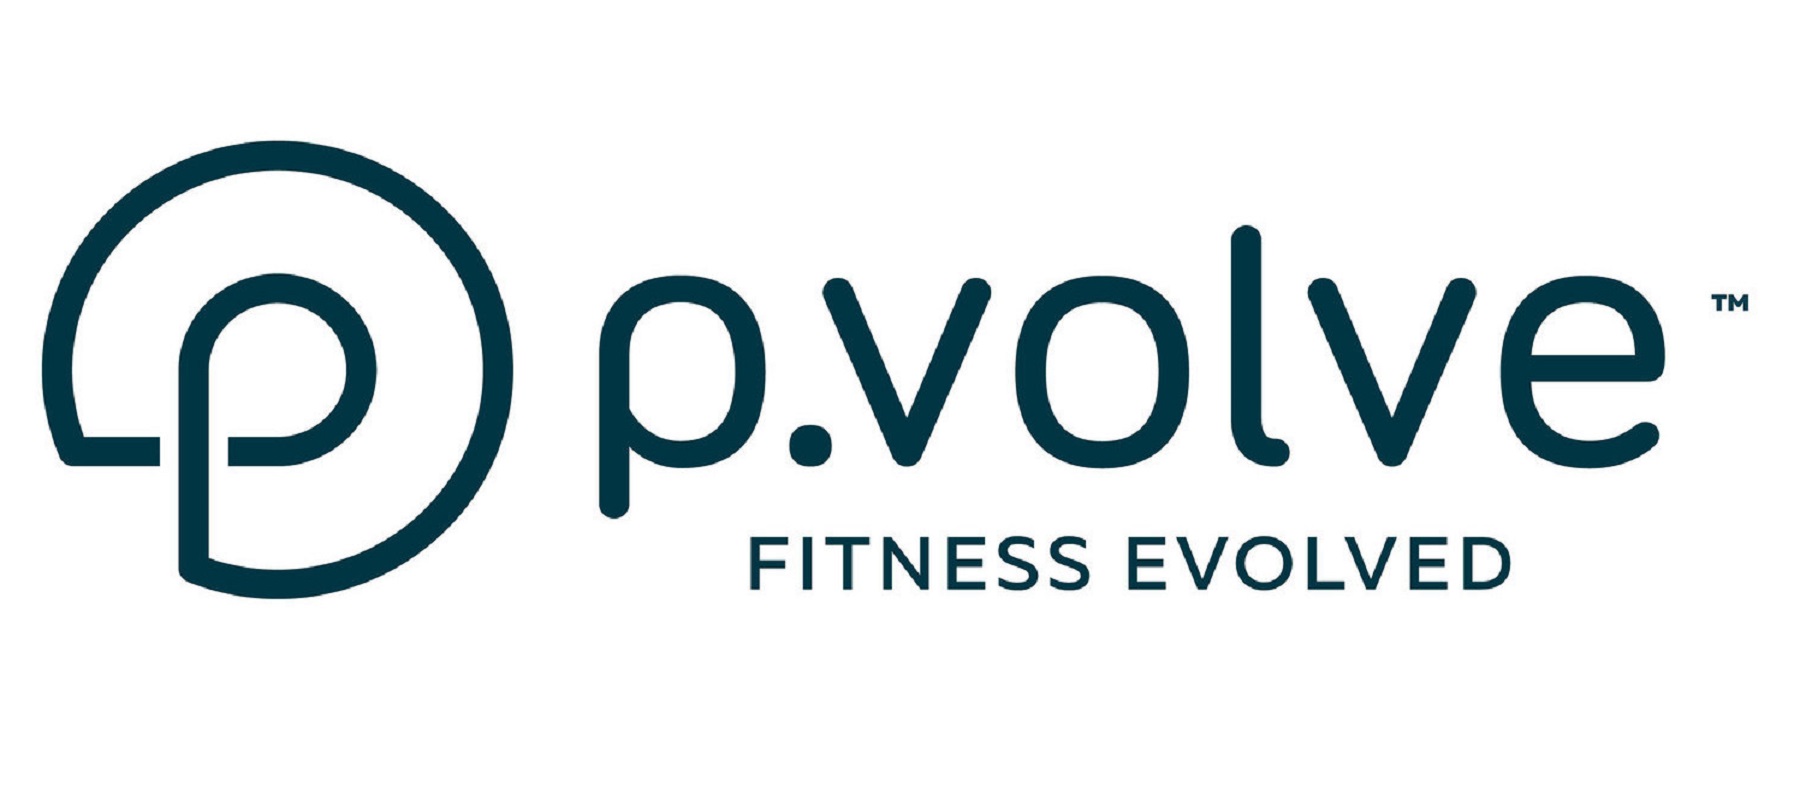 Pvolve unveils its first-ever global ad campaign featuring brand partner Jennifer Aniston